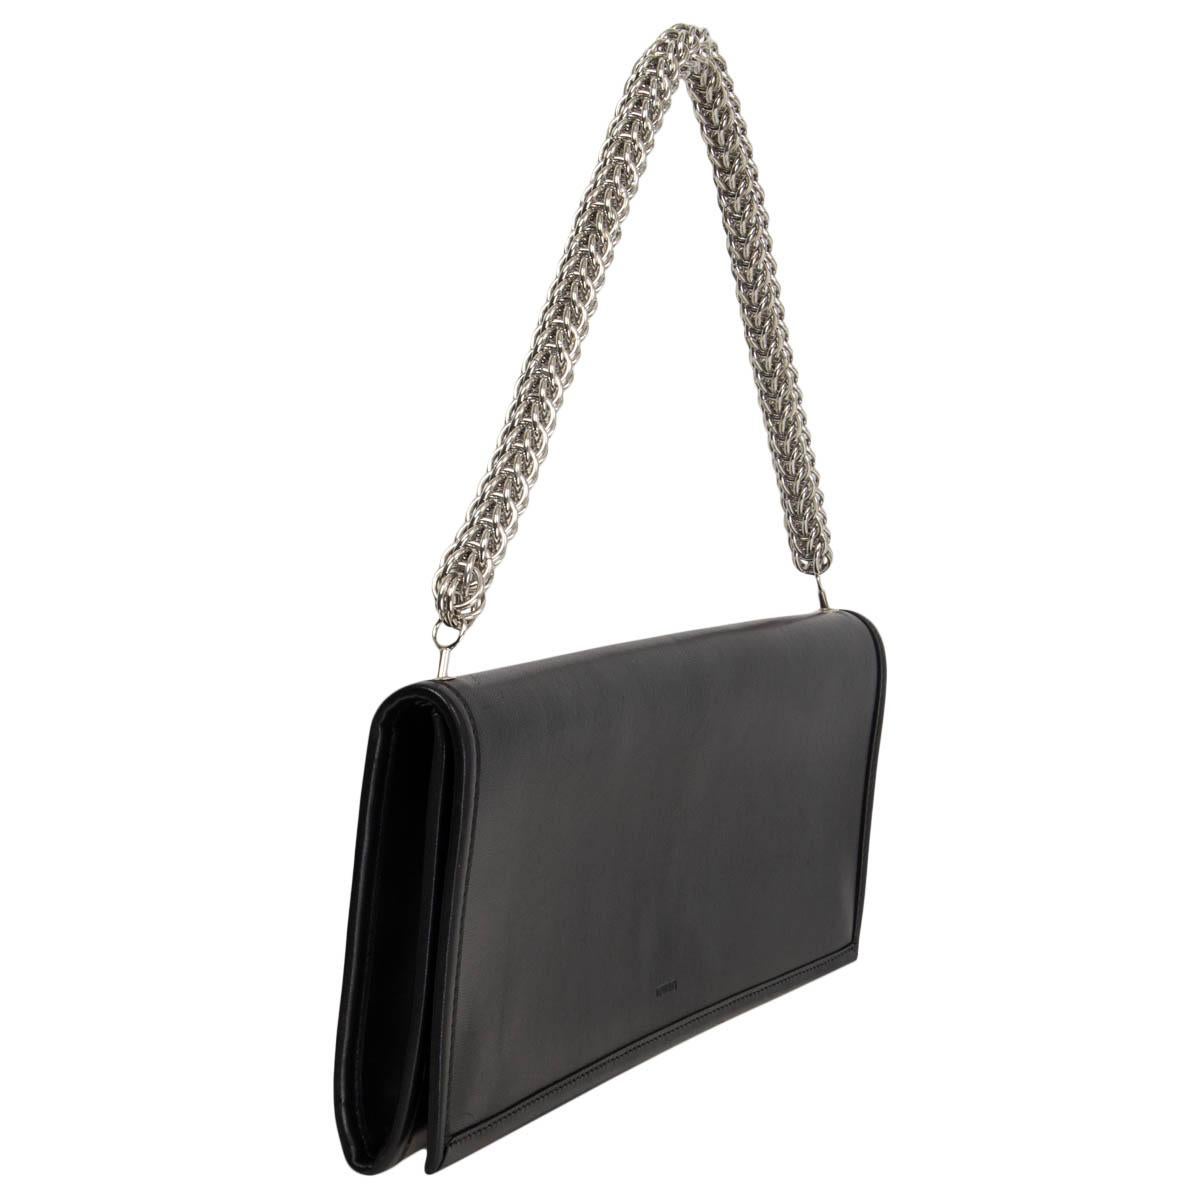 Welcome to LUX  Authentic Designer Consignment in Zurich.

100% authentic Vetements Chain Clutch in smooth black leather with exaggerated width. Features fold-over flap closure is secured by two magnetic snaps, one at either side. Includes extra